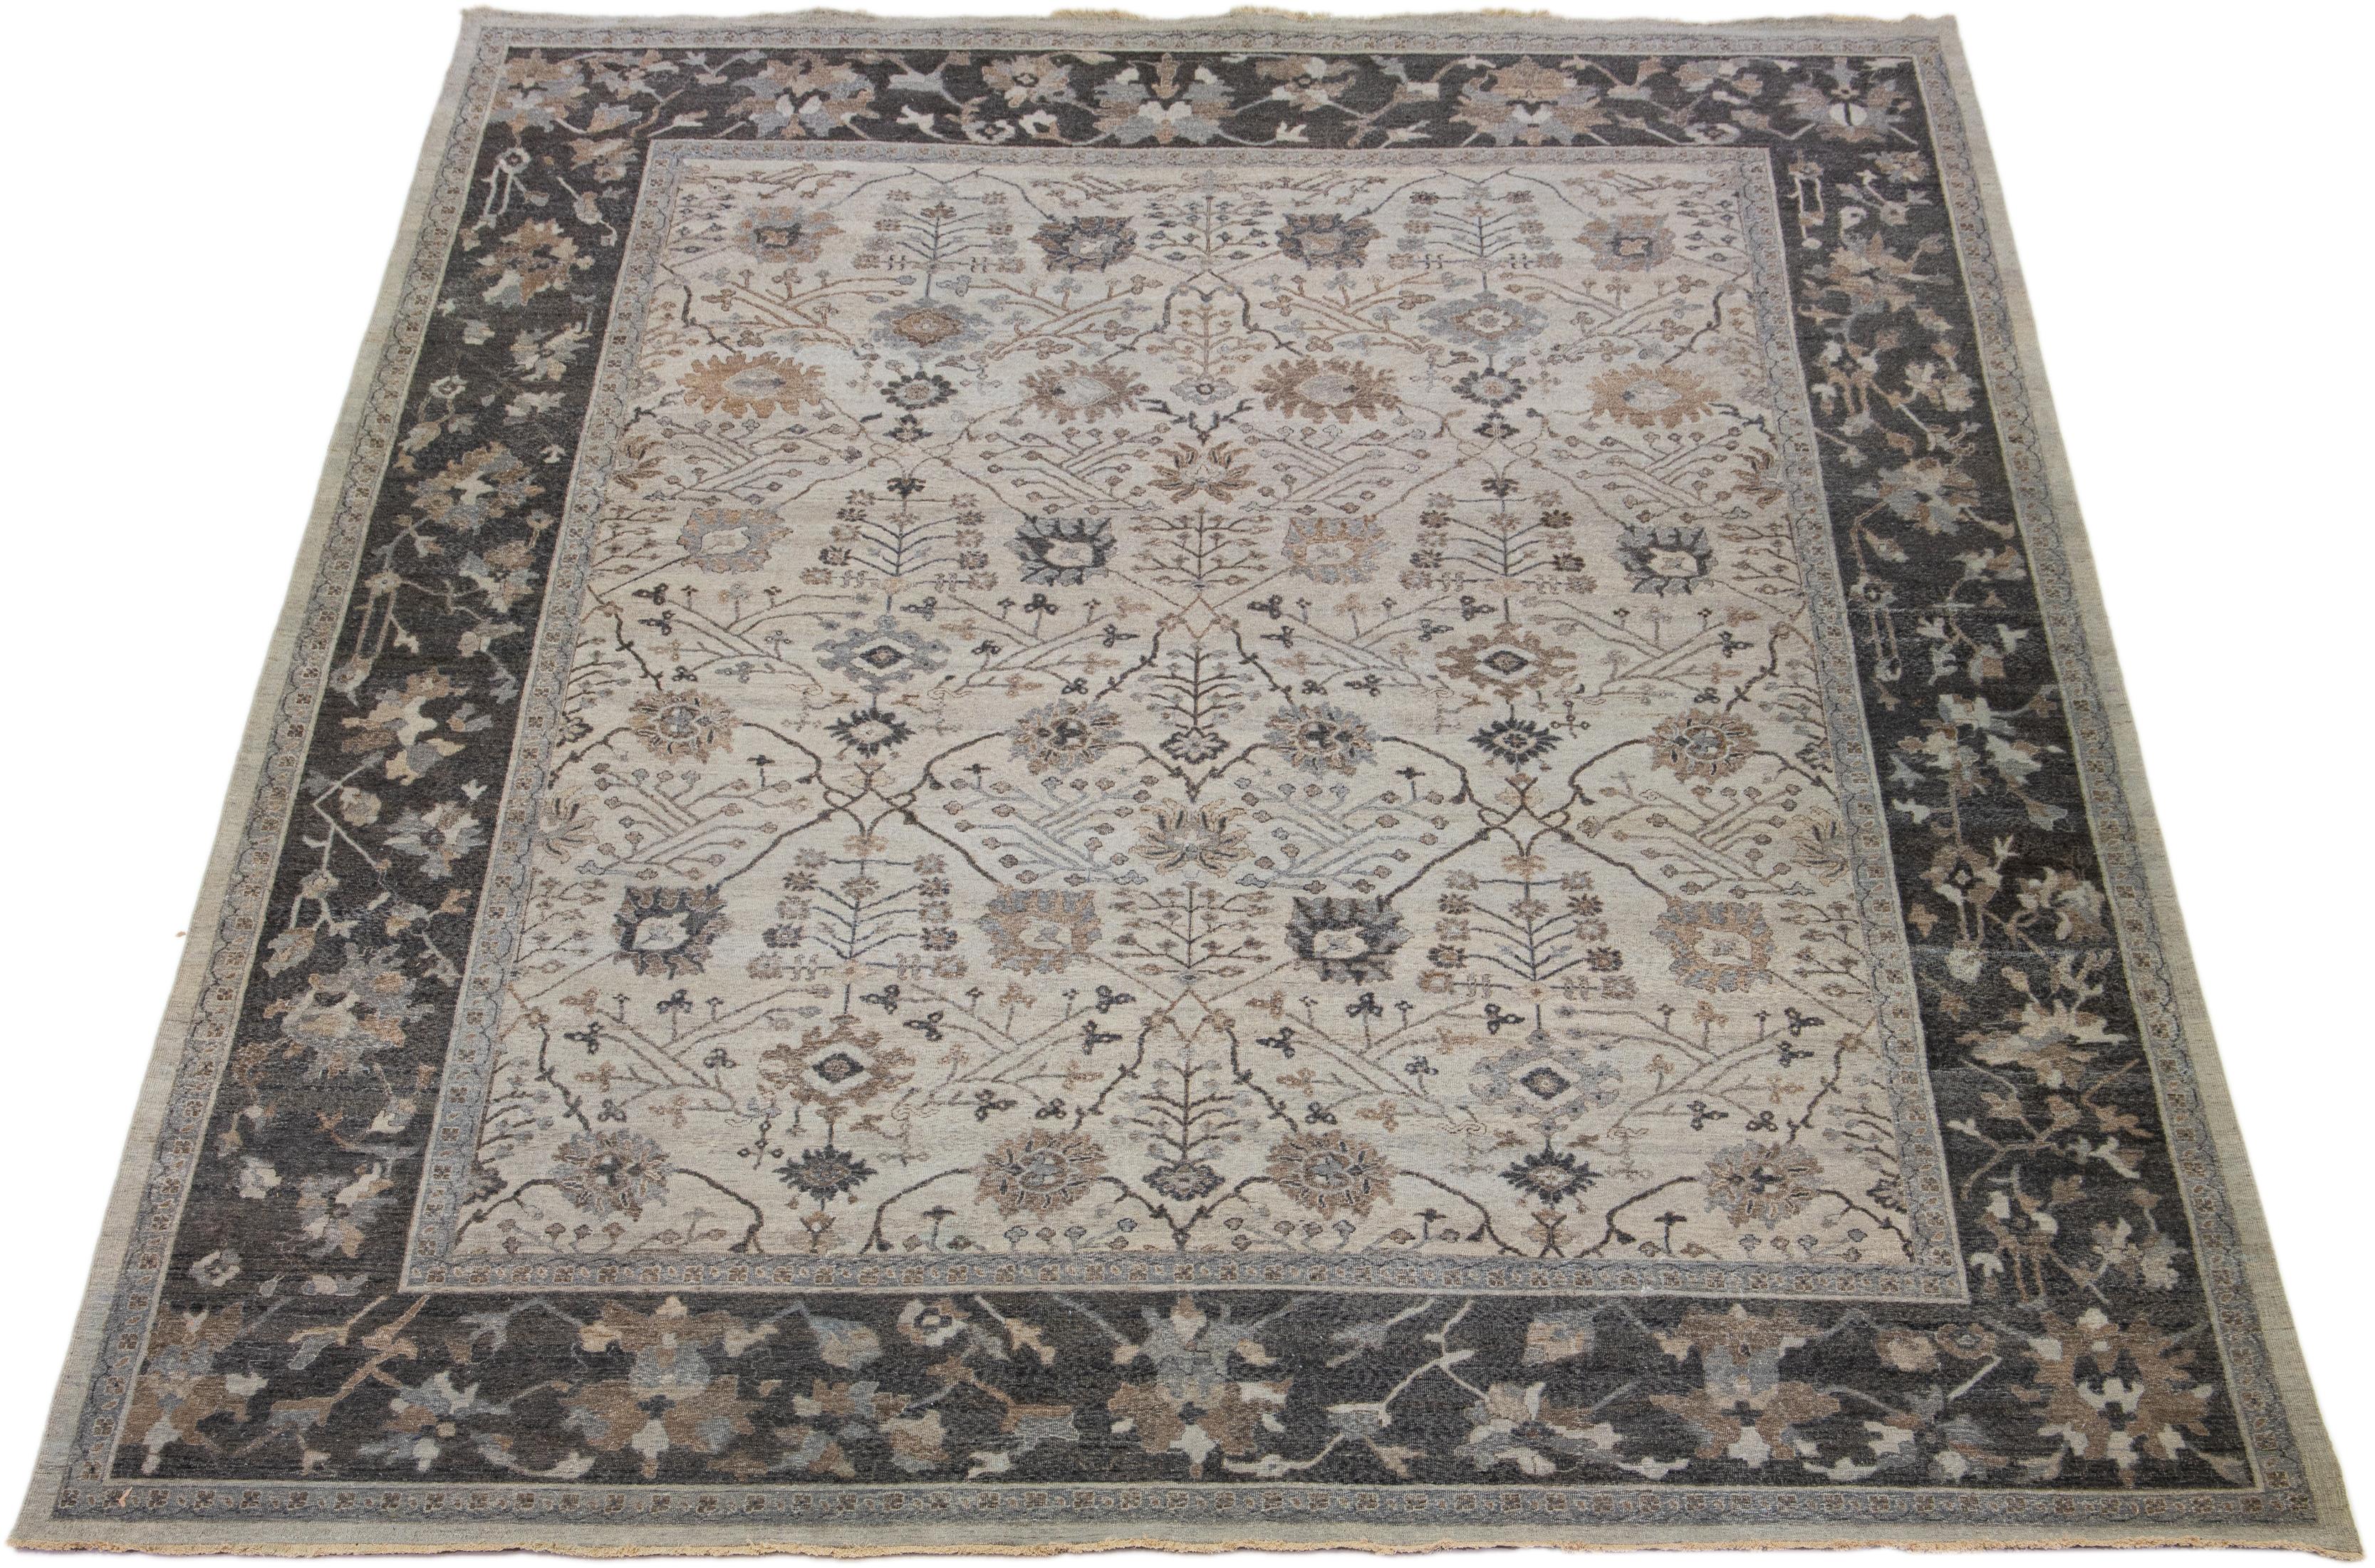 The Artisan line from Apadana brings an exquisite antique style to any space. This hand-knotted rug showcases a beautiful all-over floral pattern with a Gray color scheme and multi-colored accents. It measures 11' 09